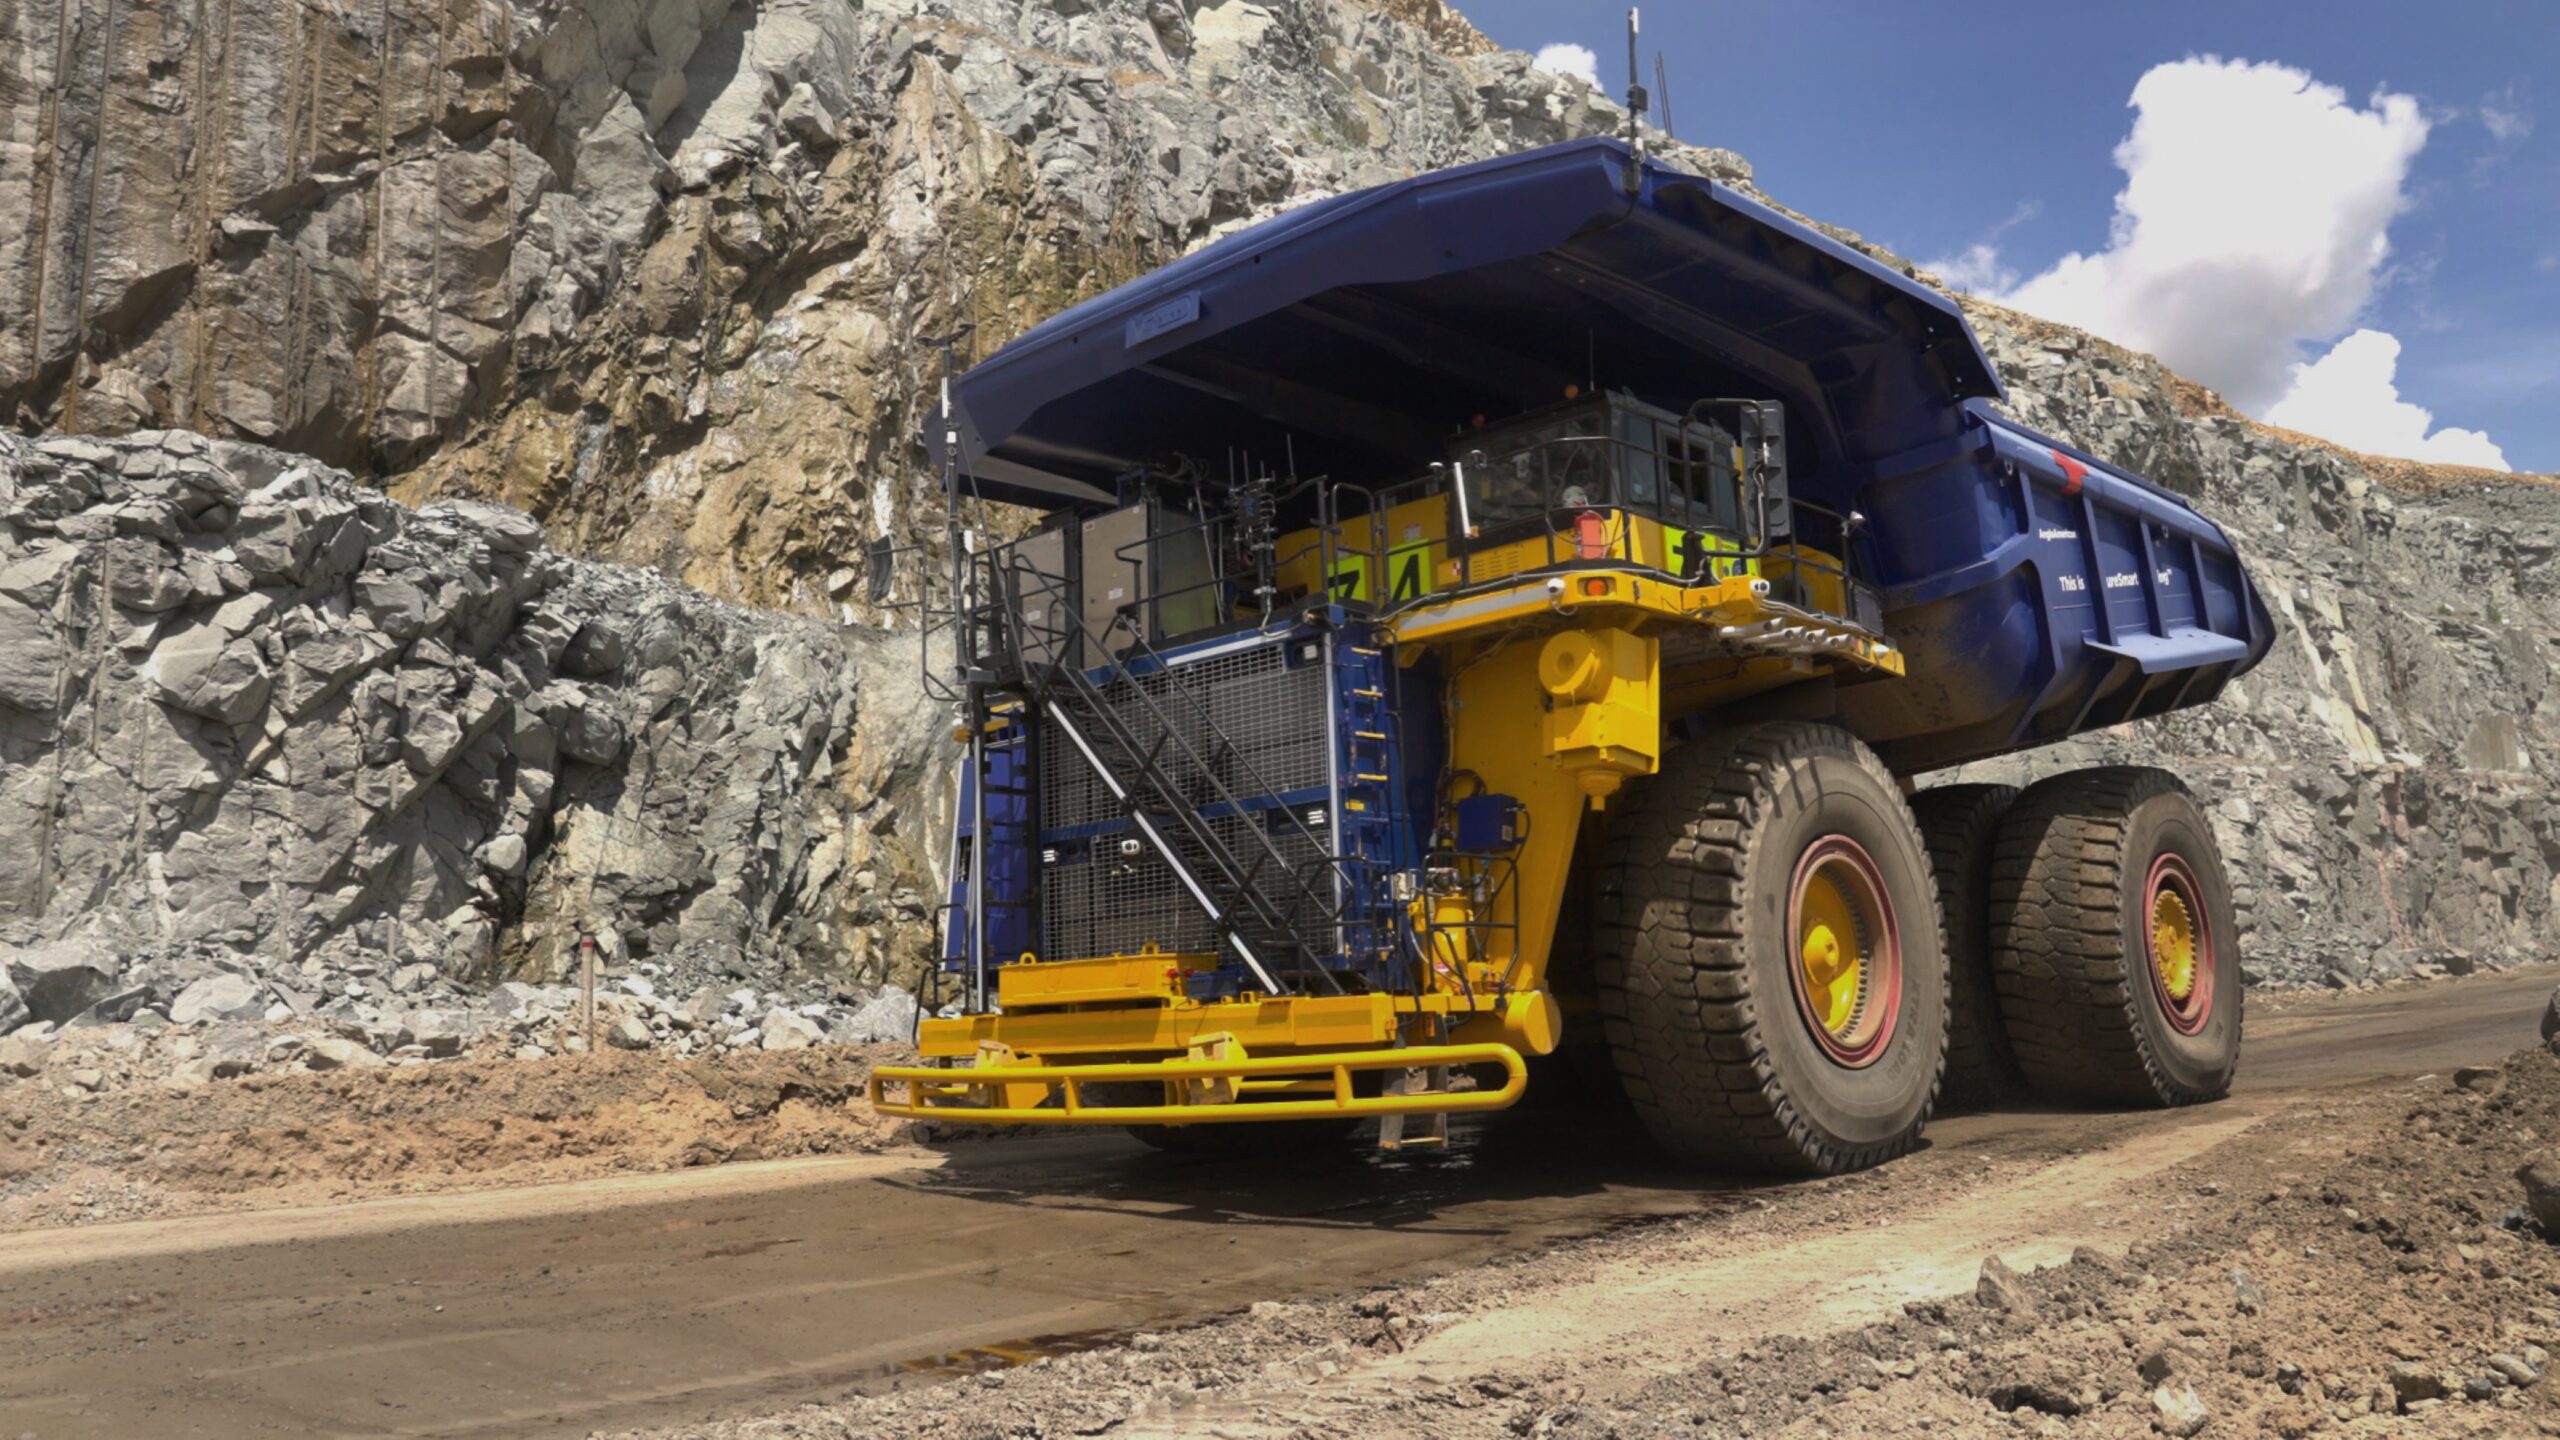 Shot of a mining haul truck operating at a mine site in South Africa.